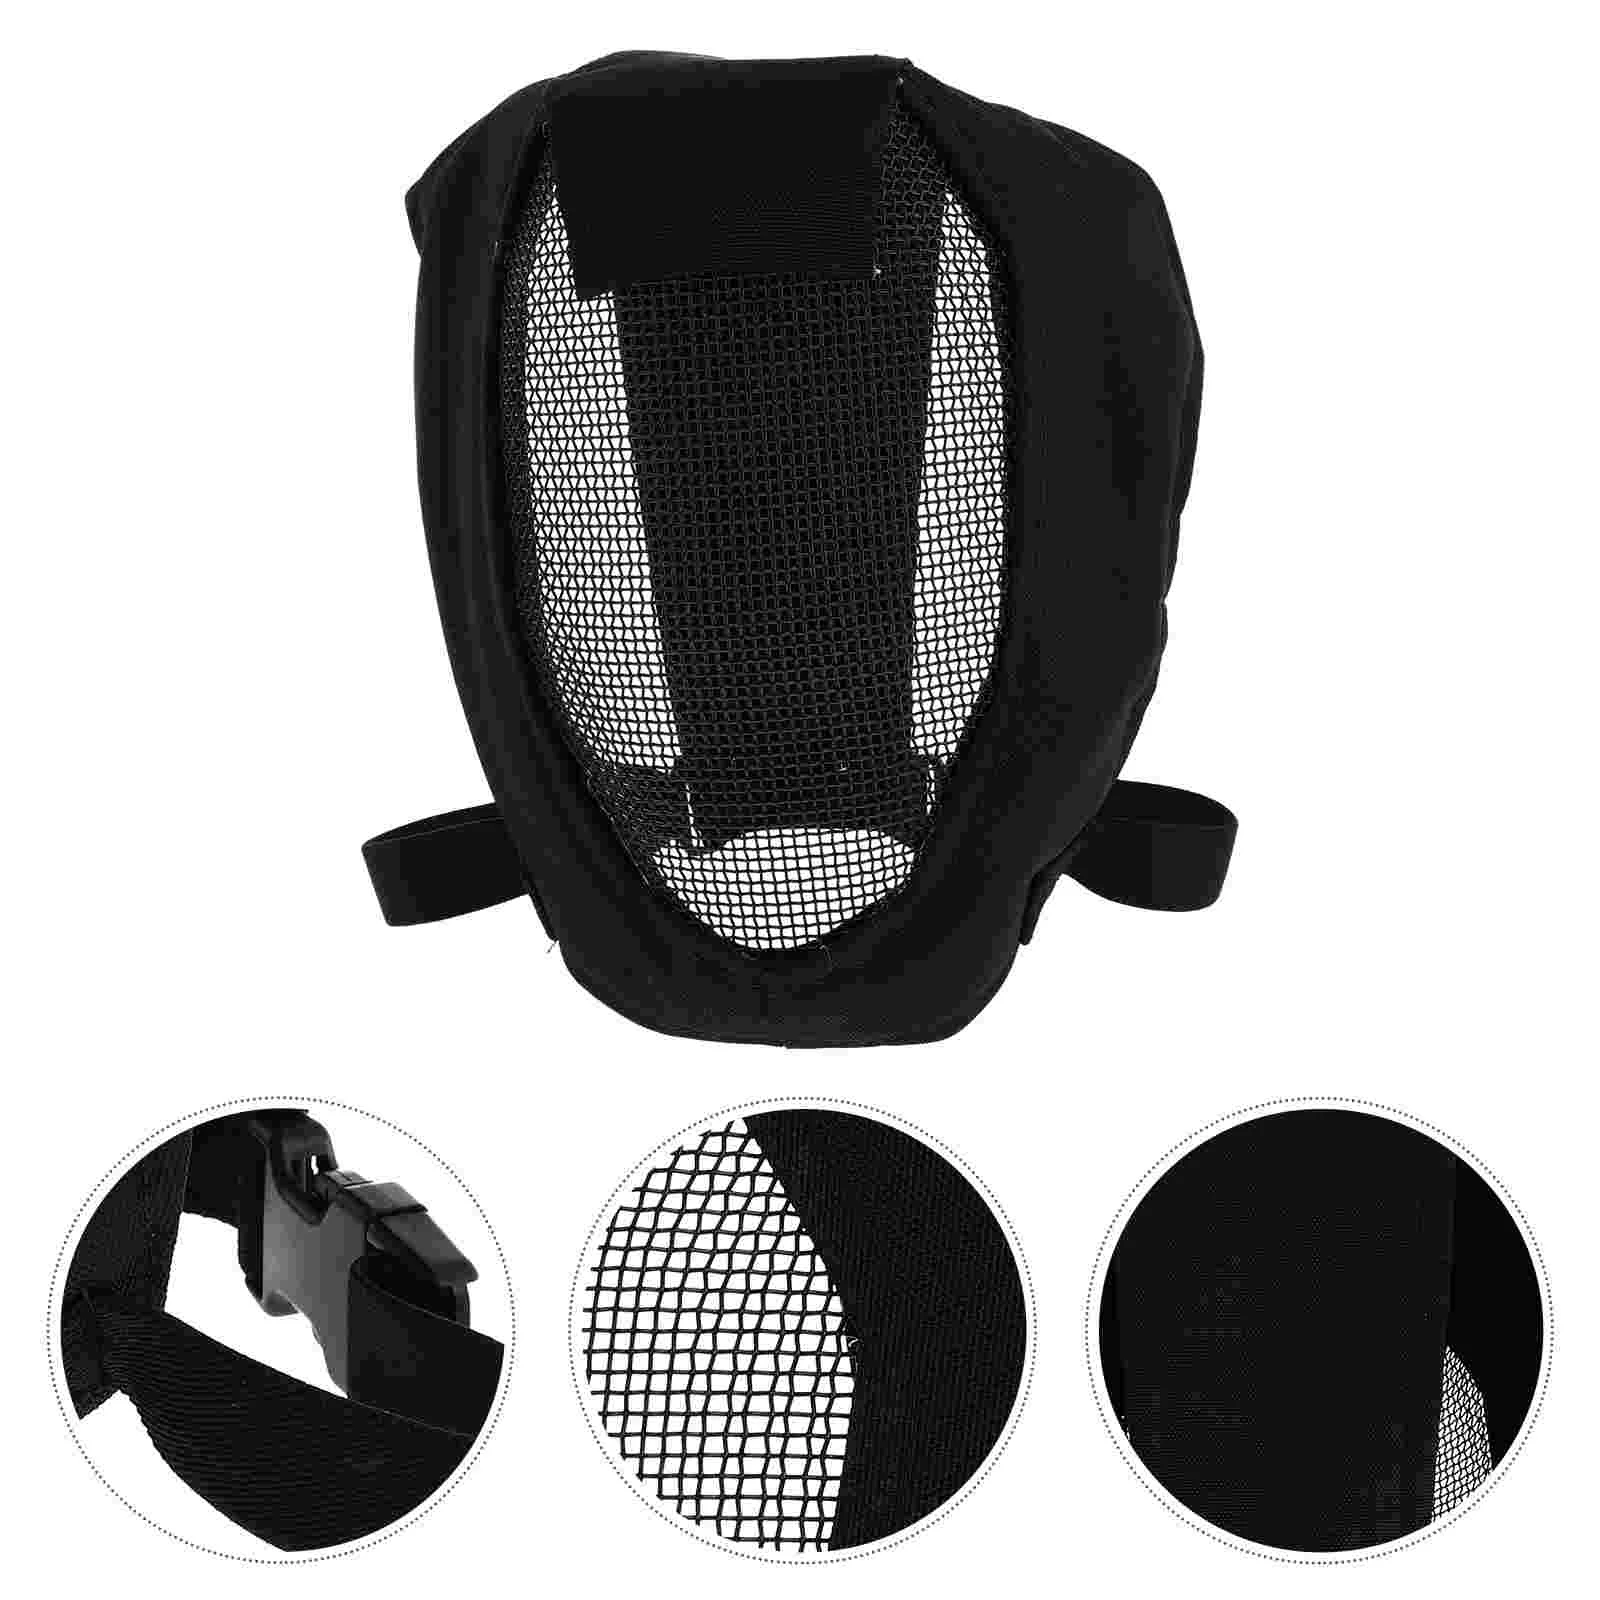 

Fencing Mask Riot Equipment Protective Head Cover Outdoor Oxford Breathable Game